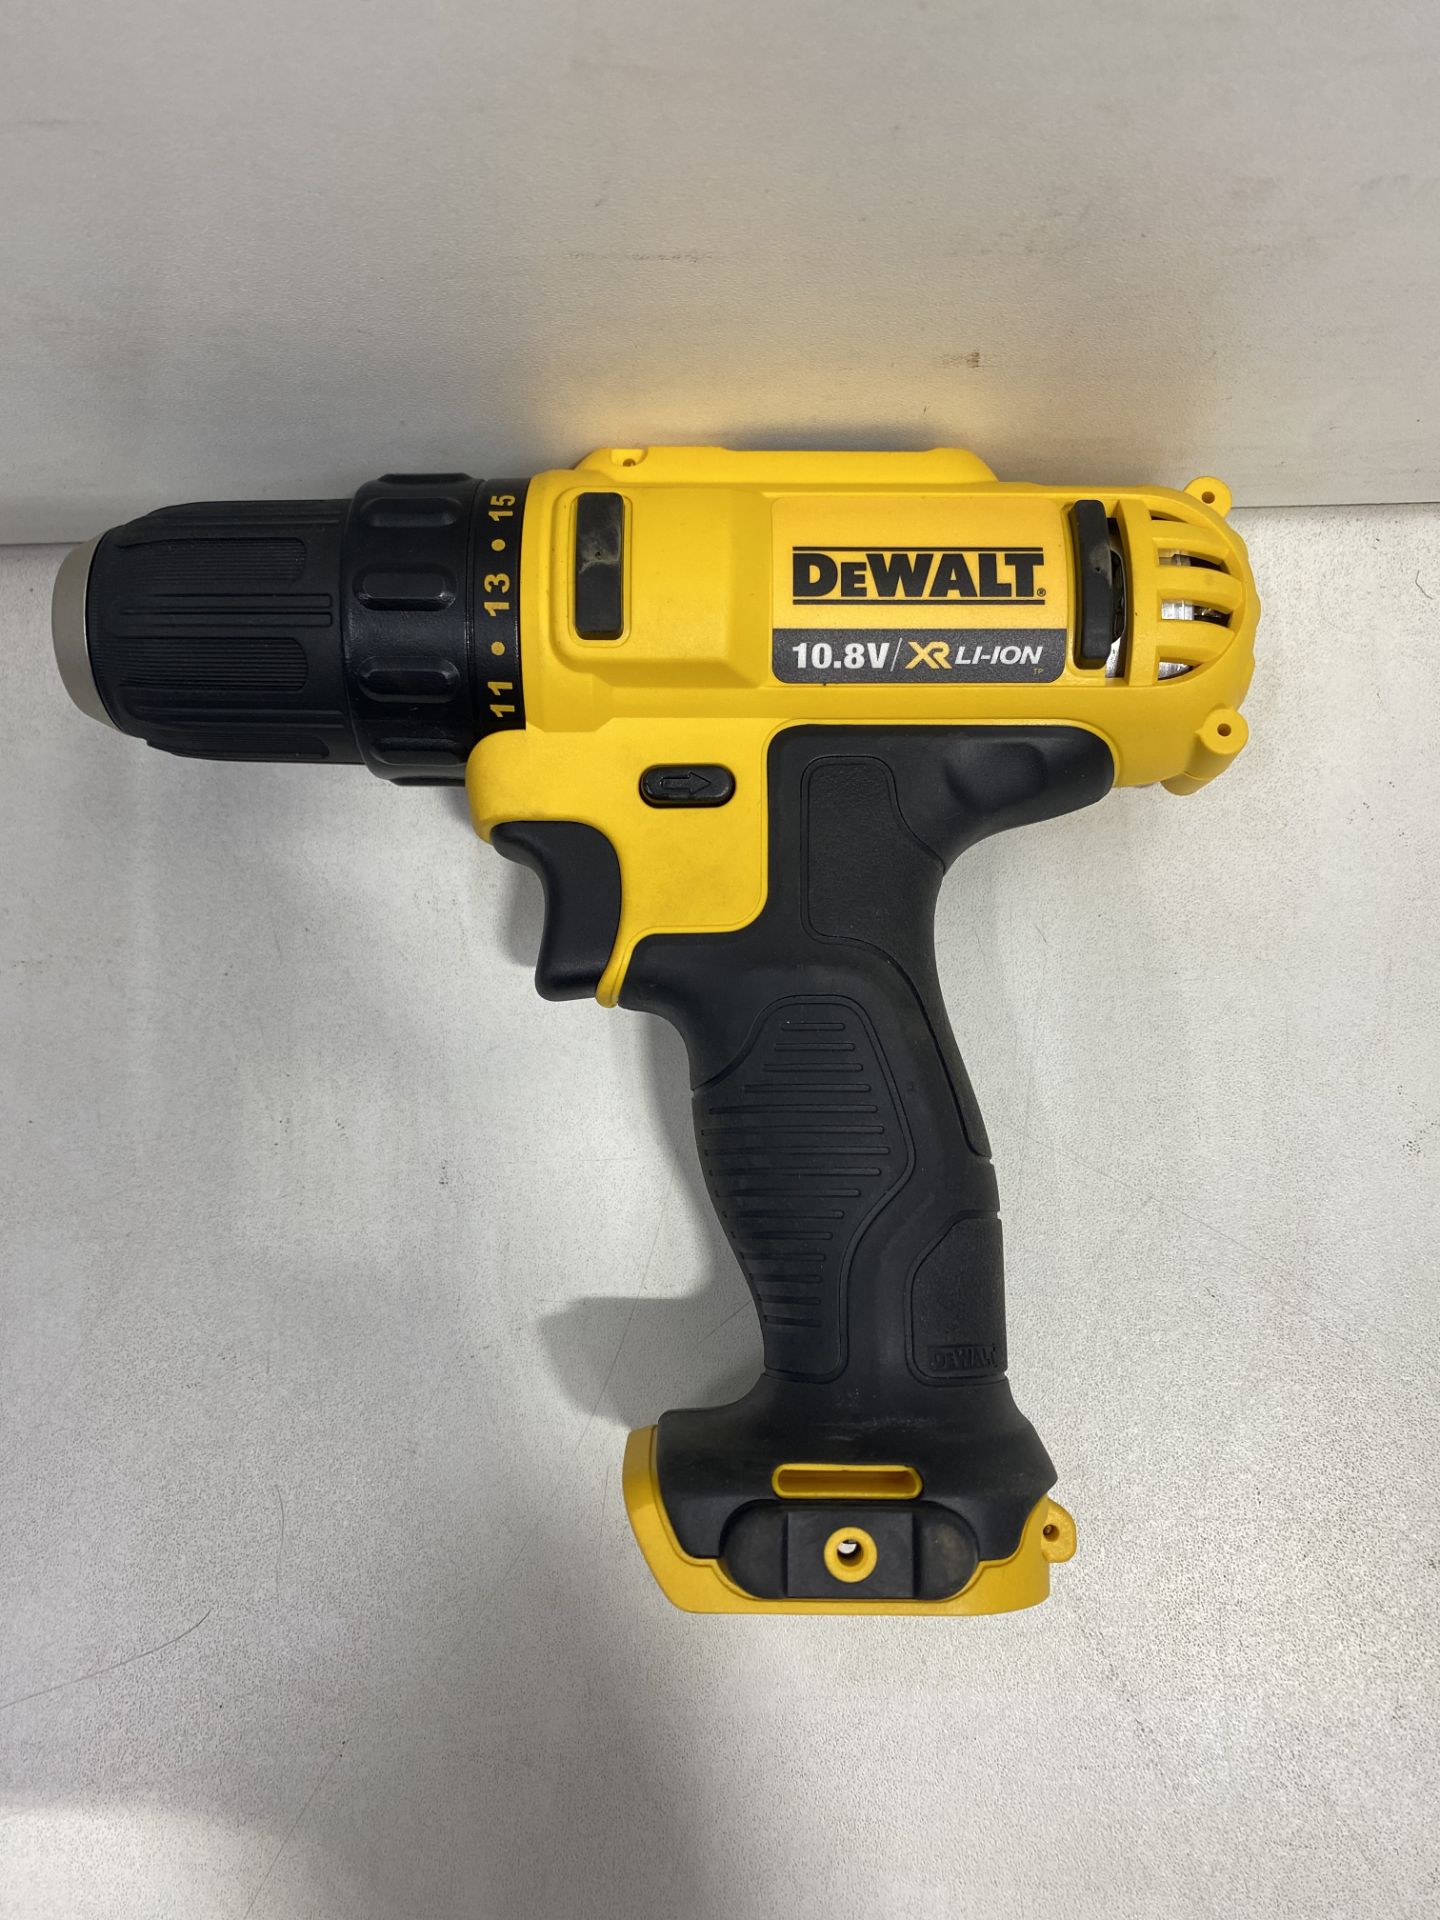 2 x DeWalt DCD710 10.8V XR Cordless Compact Drill Driver (Body Only) - Image 2 of 5